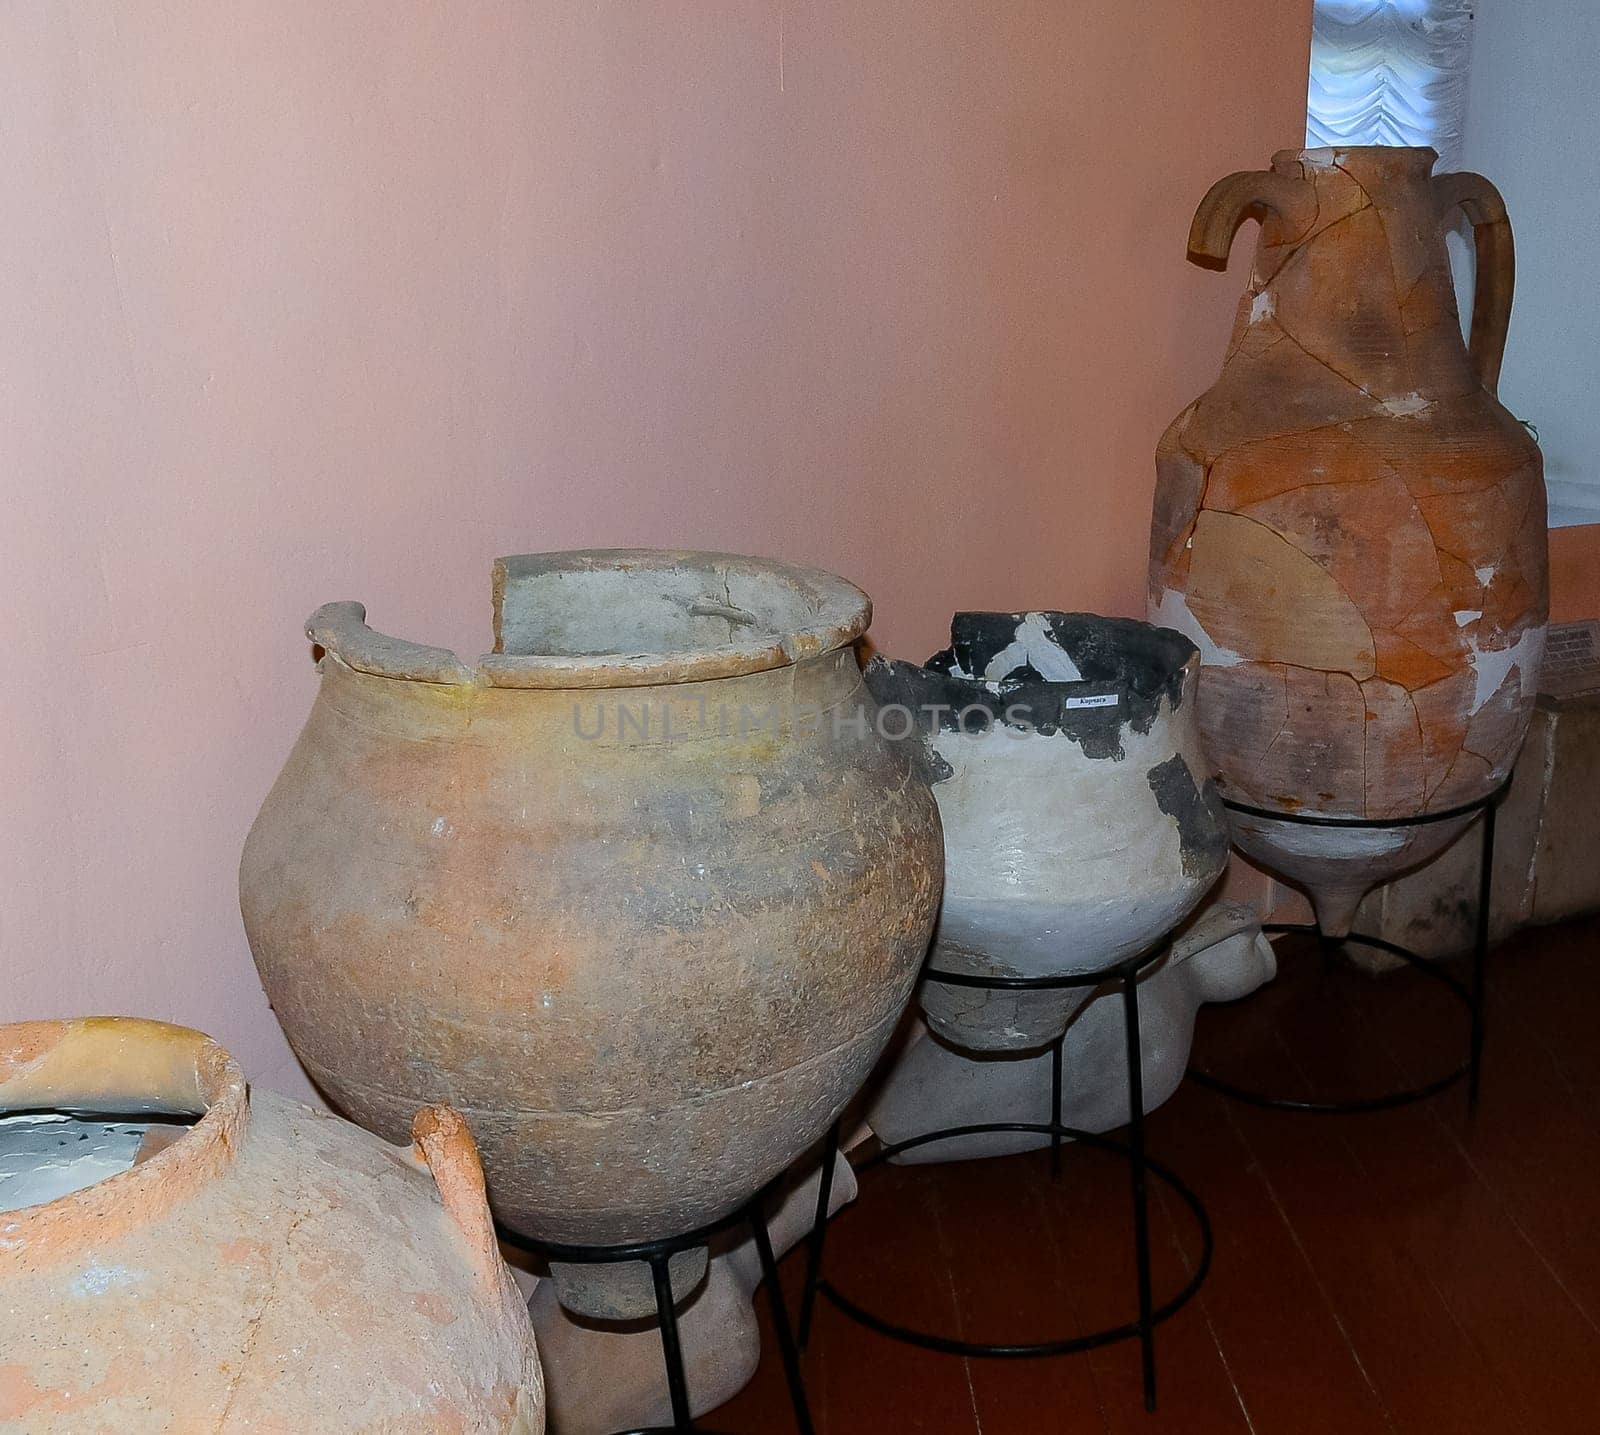 exhibits from excavations inside the museum at the archaeological site of the ancient Greek city of Olbia, Ukraine by Hydrobiolog